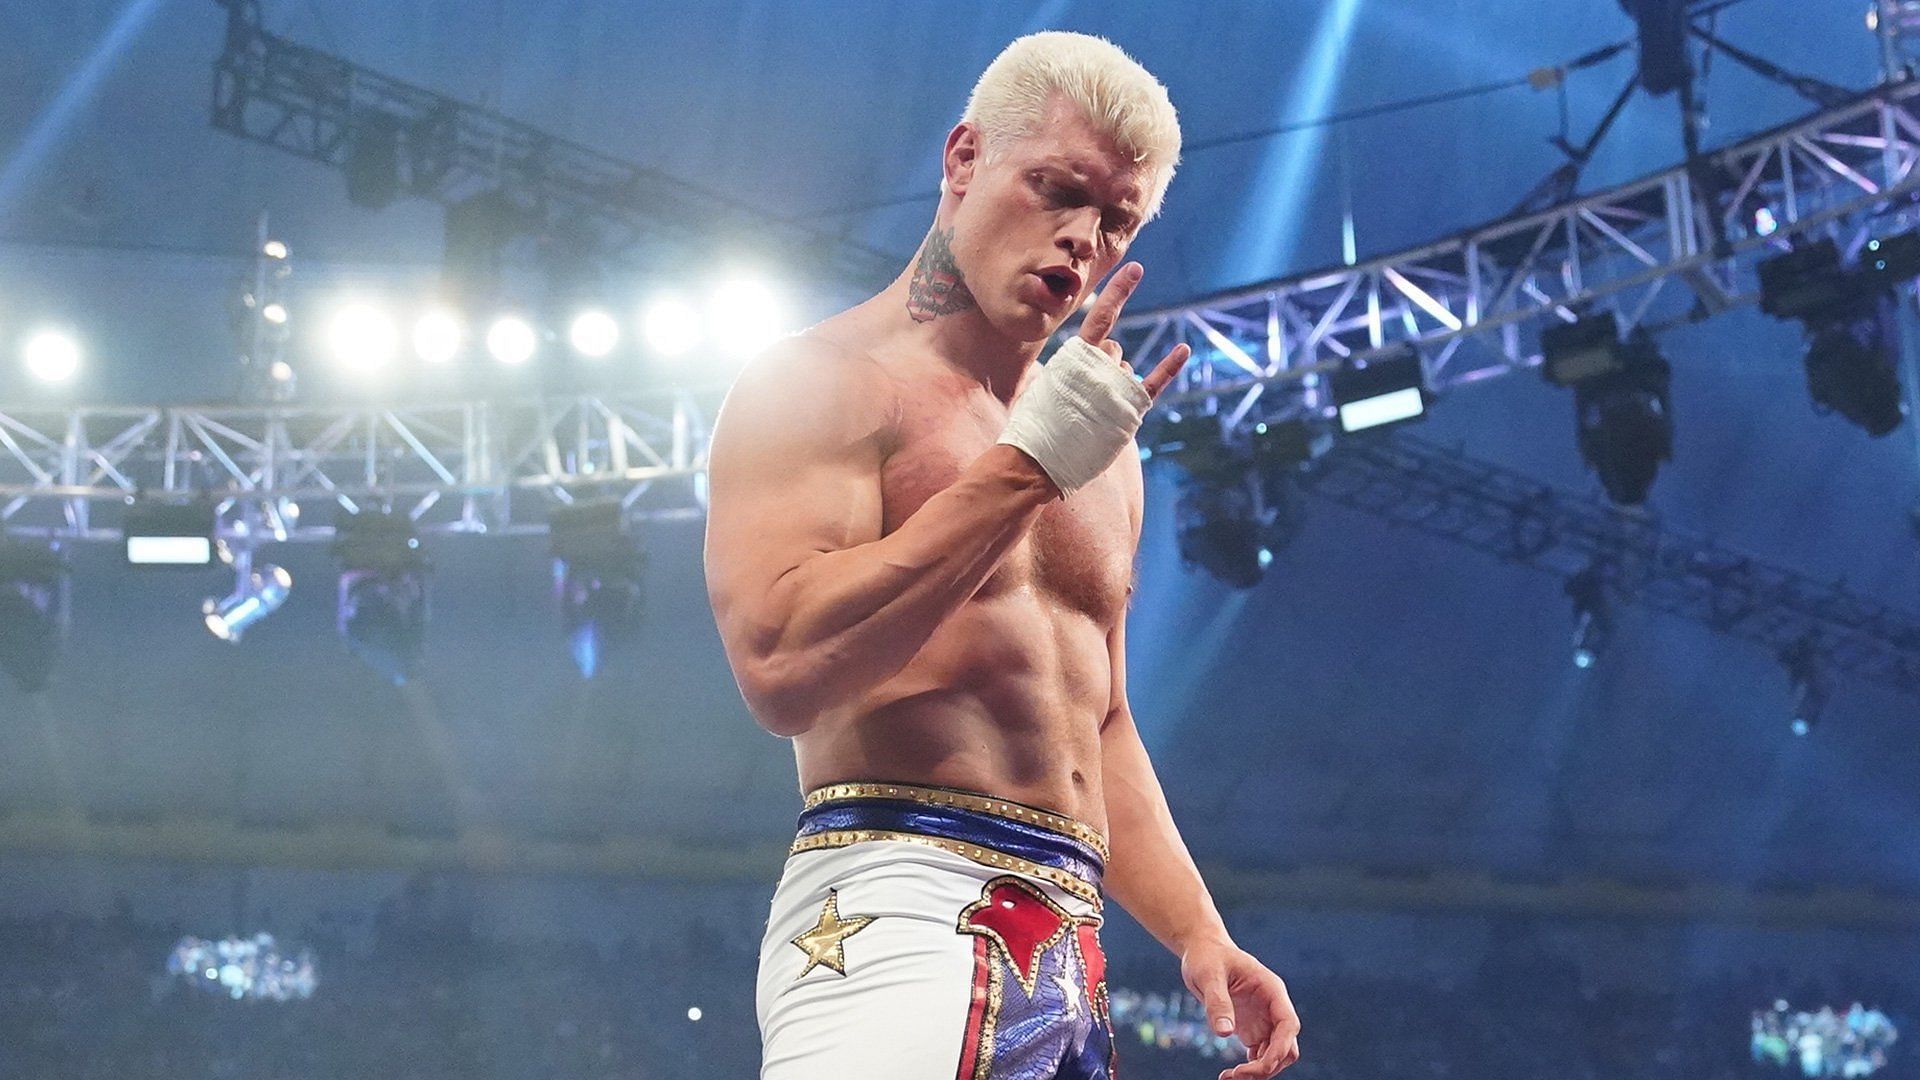 Cody Rhodes will face Roman Reigns at WrestleMania 40